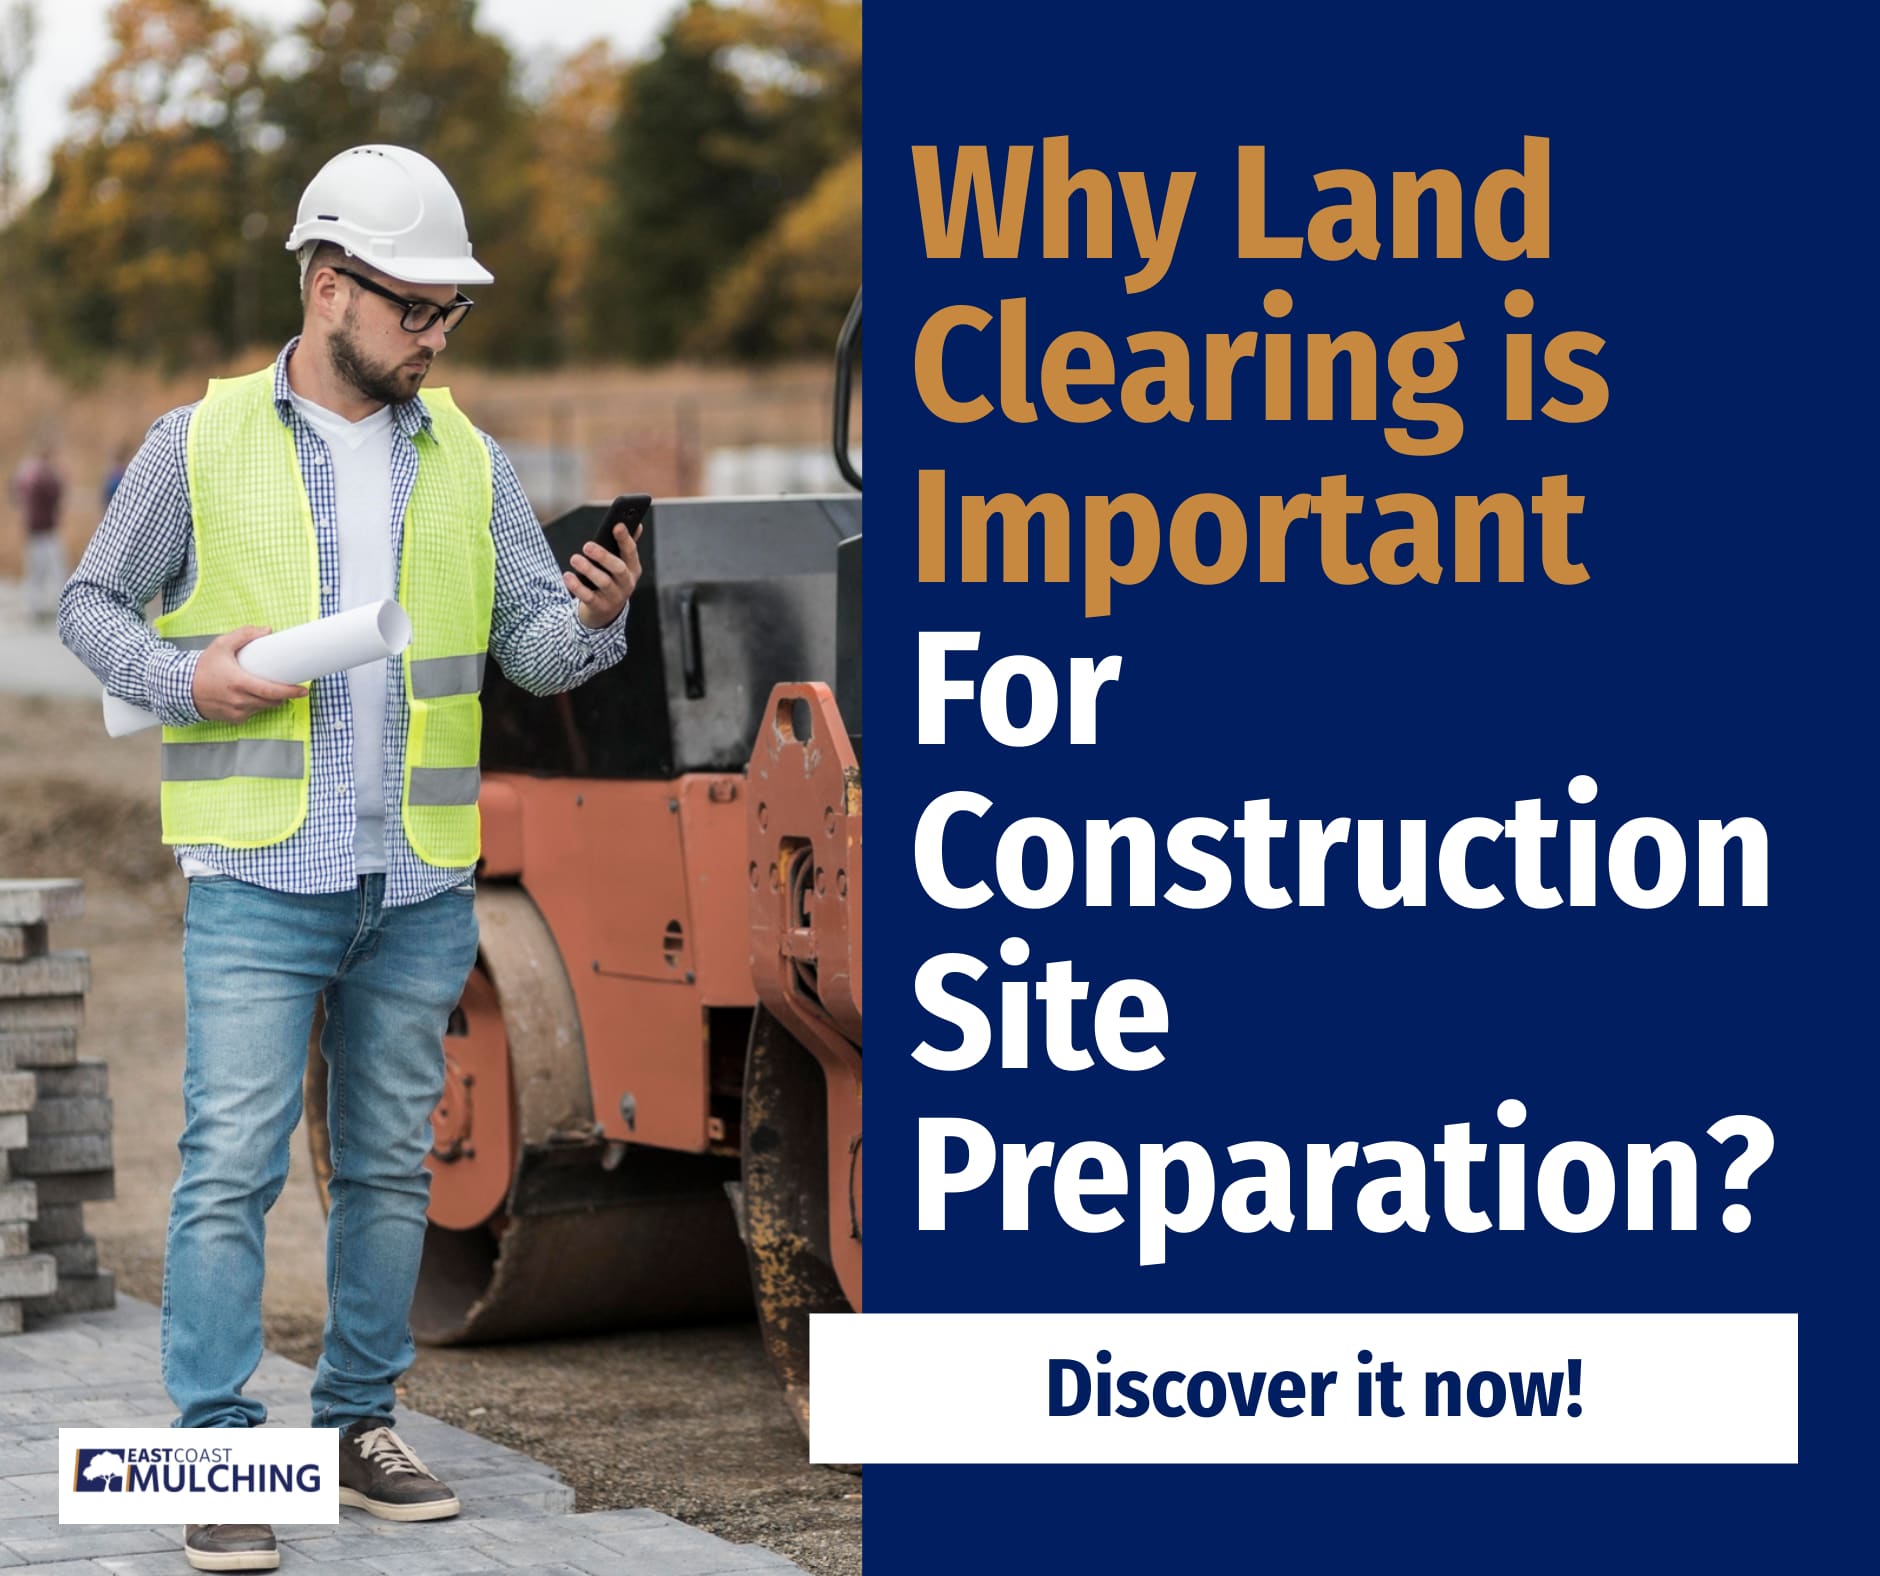 Why Land Clearing is Important For Construction Site Preparation?